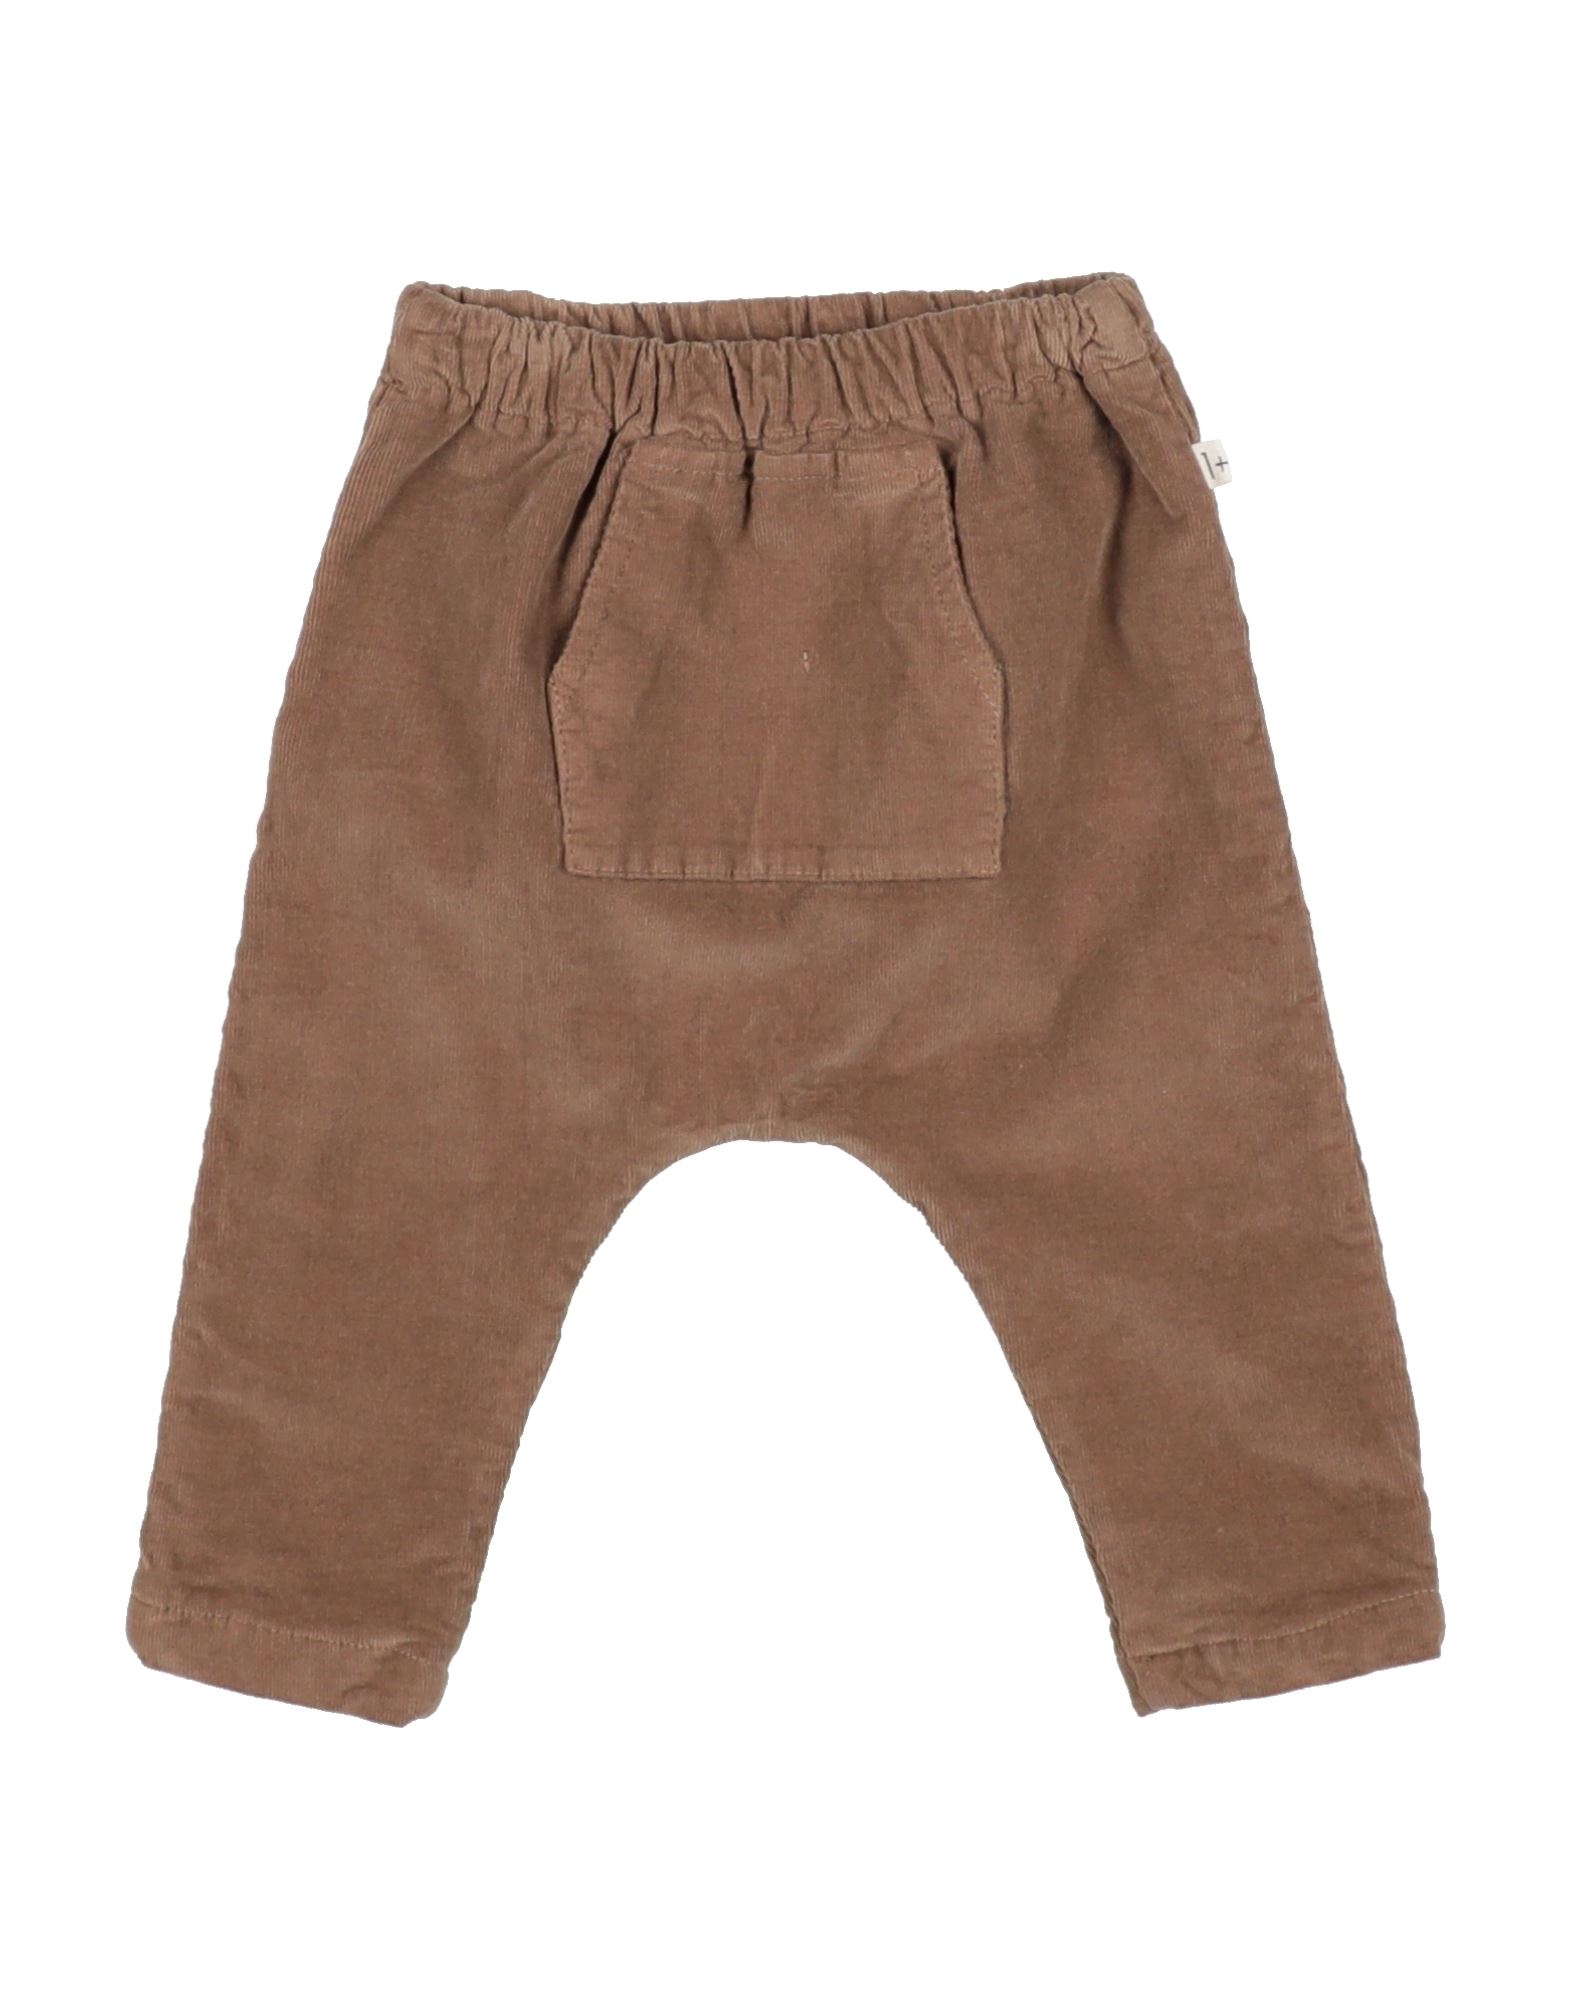 1 + IN THE FAMILY Hose Kinder Khaki von 1 + IN THE FAMILY